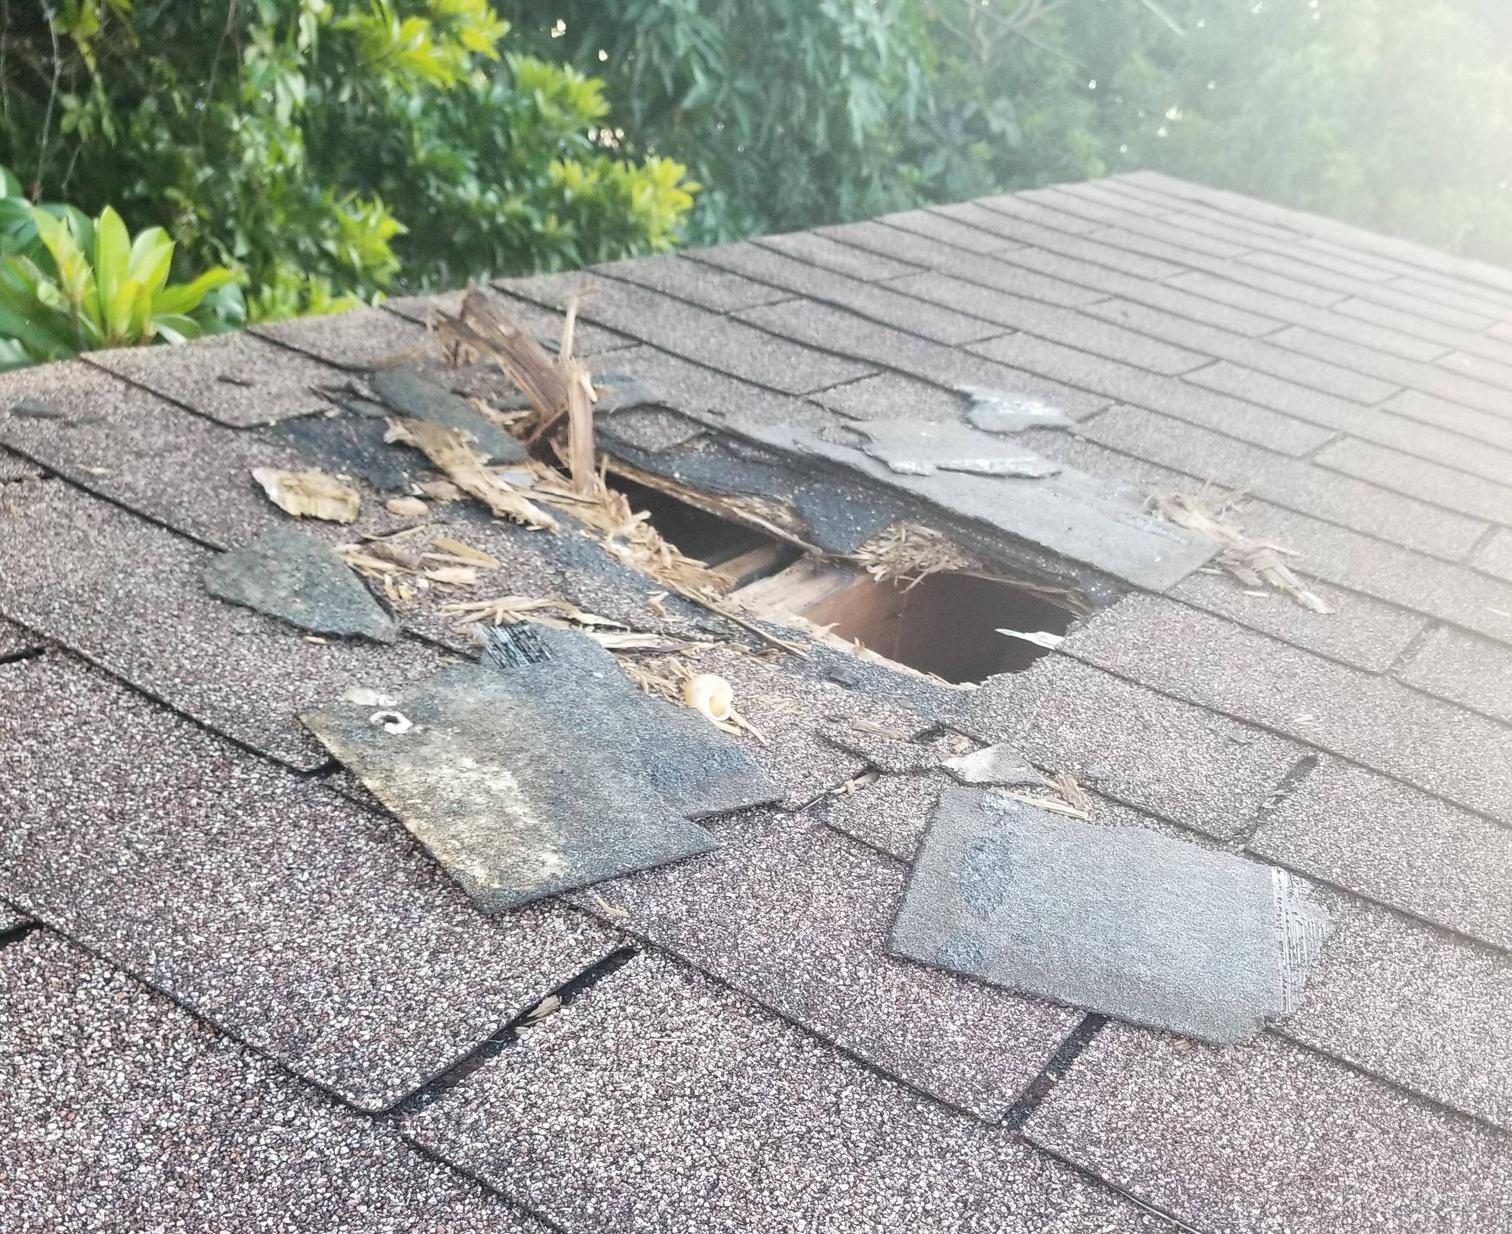 Frequently Asked Questions About Roof Repair